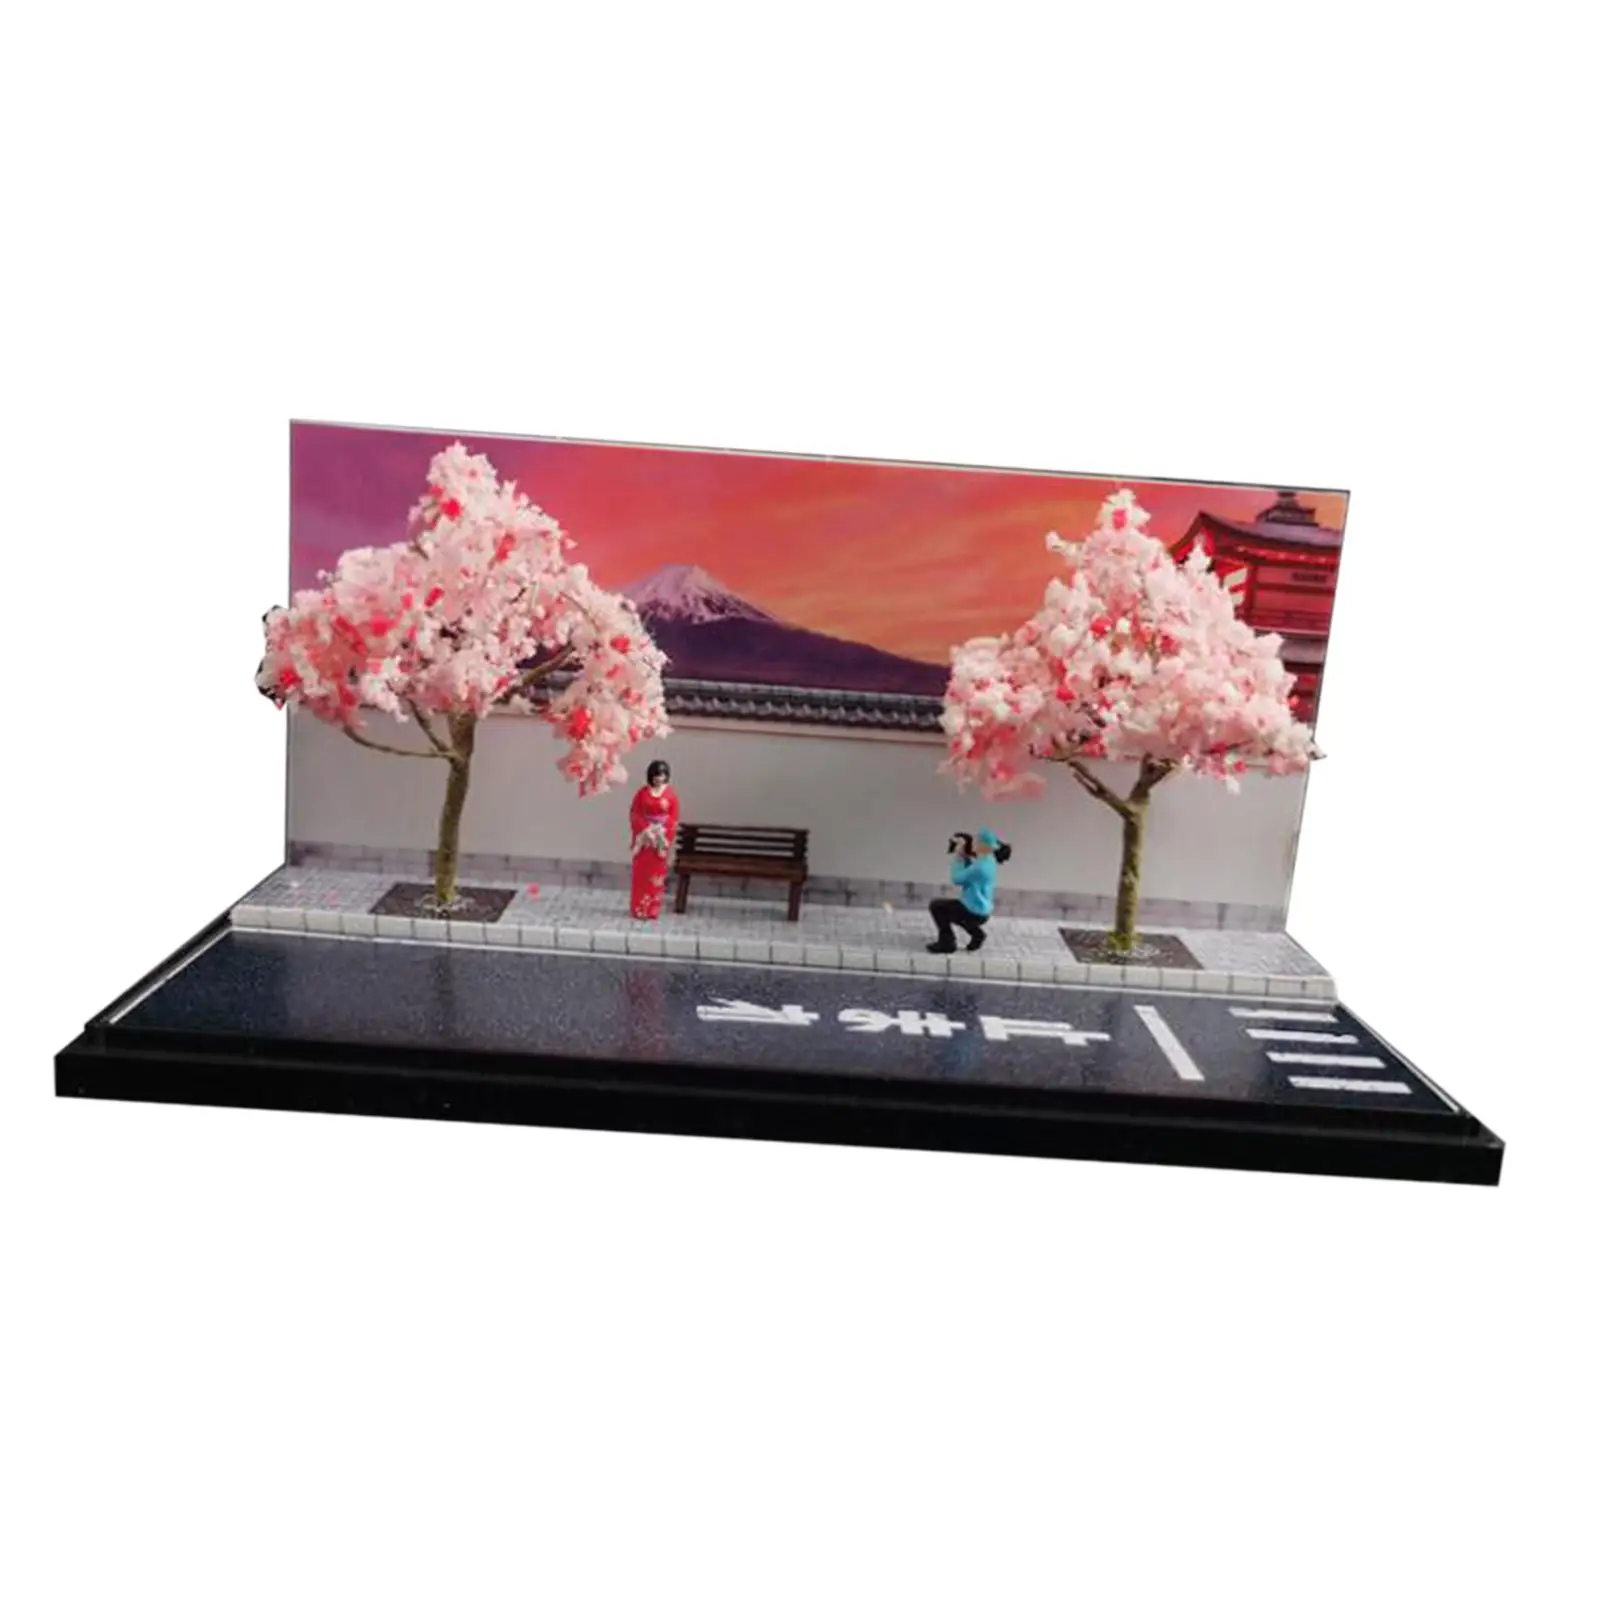 1:64 Background Diorama Scenery with People Figures Trees Bench S Scale Fairy Garden Train Railway Sand Table Layout Decoration